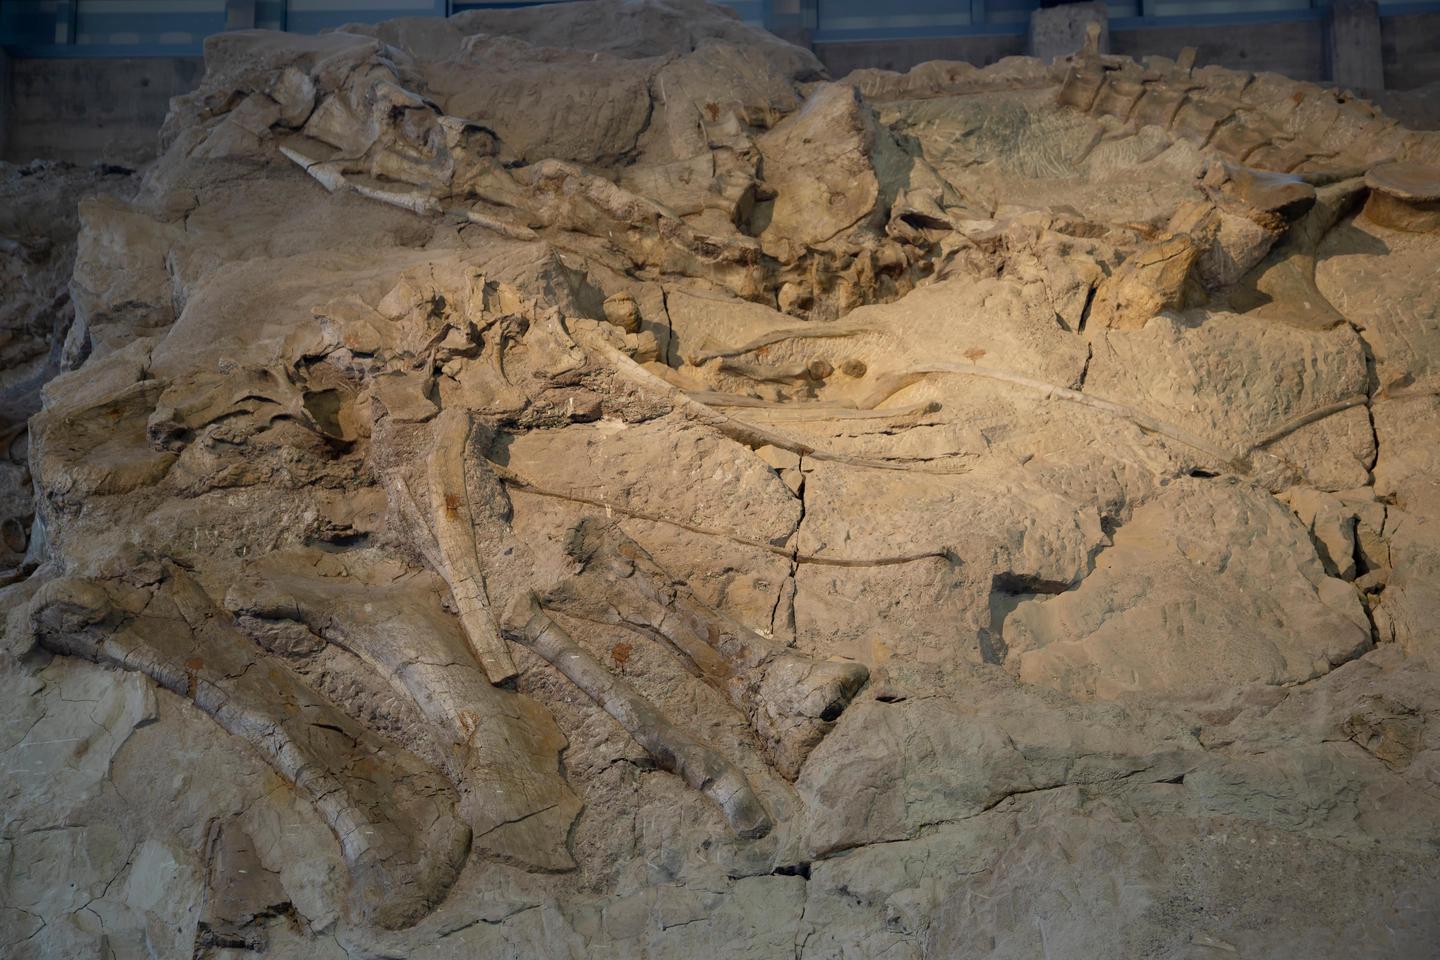 Camarasaurus Hump SpecimenFossils from a camarasaurus dinosaur display the well articulated specimens still found in the rock in the Quarry Exhibit Hall.